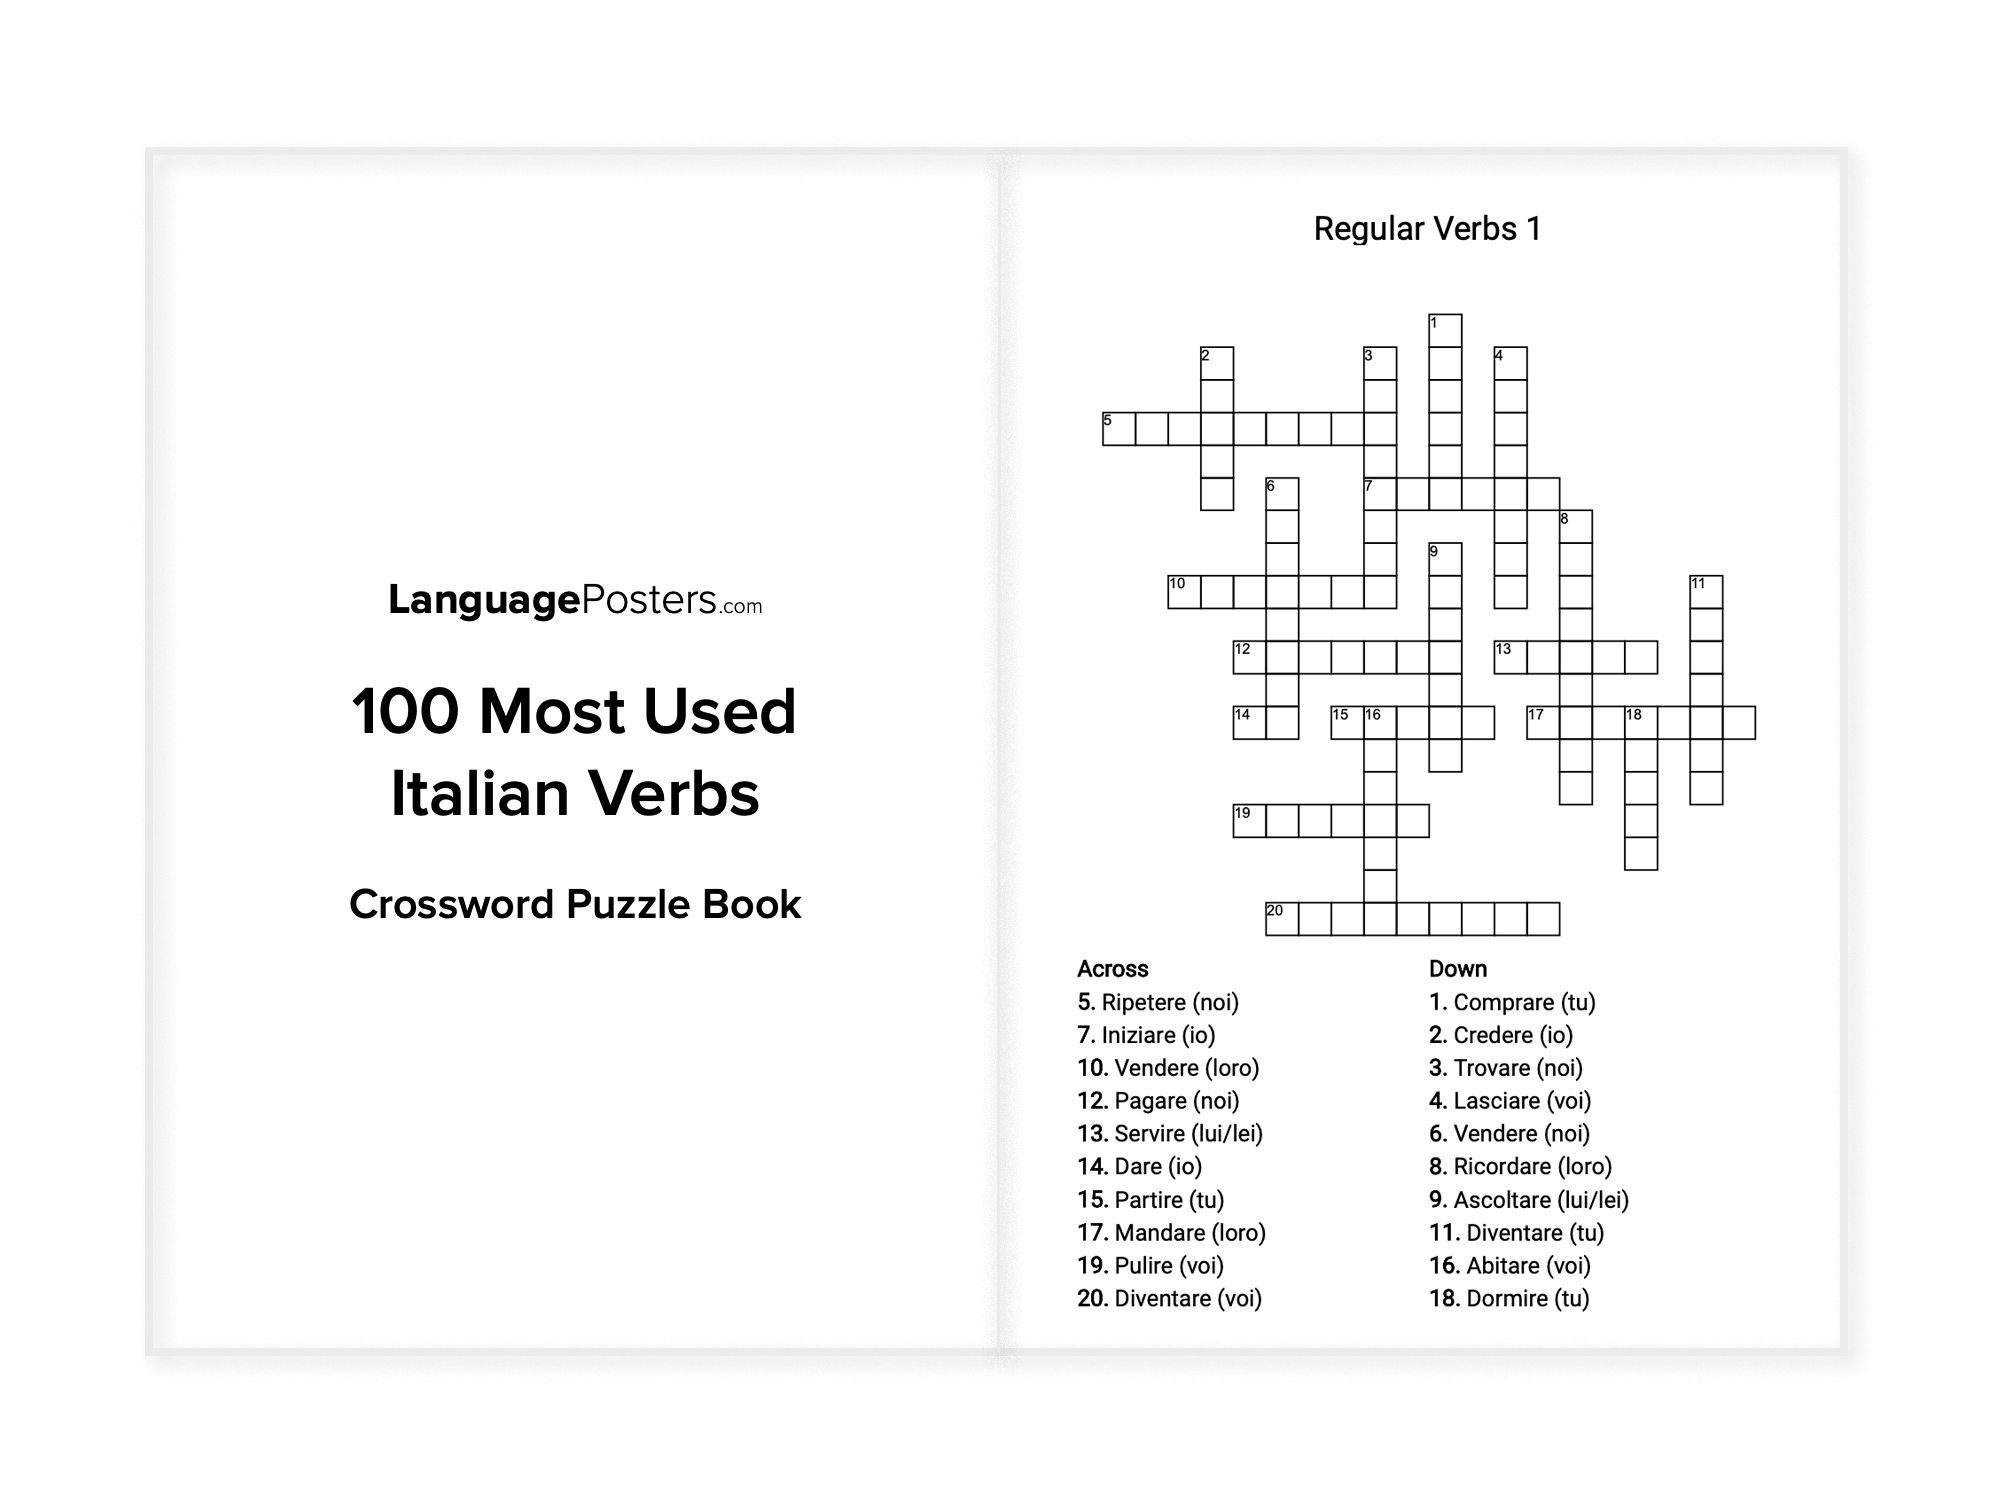 LanguagePosters.com - 100 Most Used Italian Verbs Crossword Puzzle Book Preview